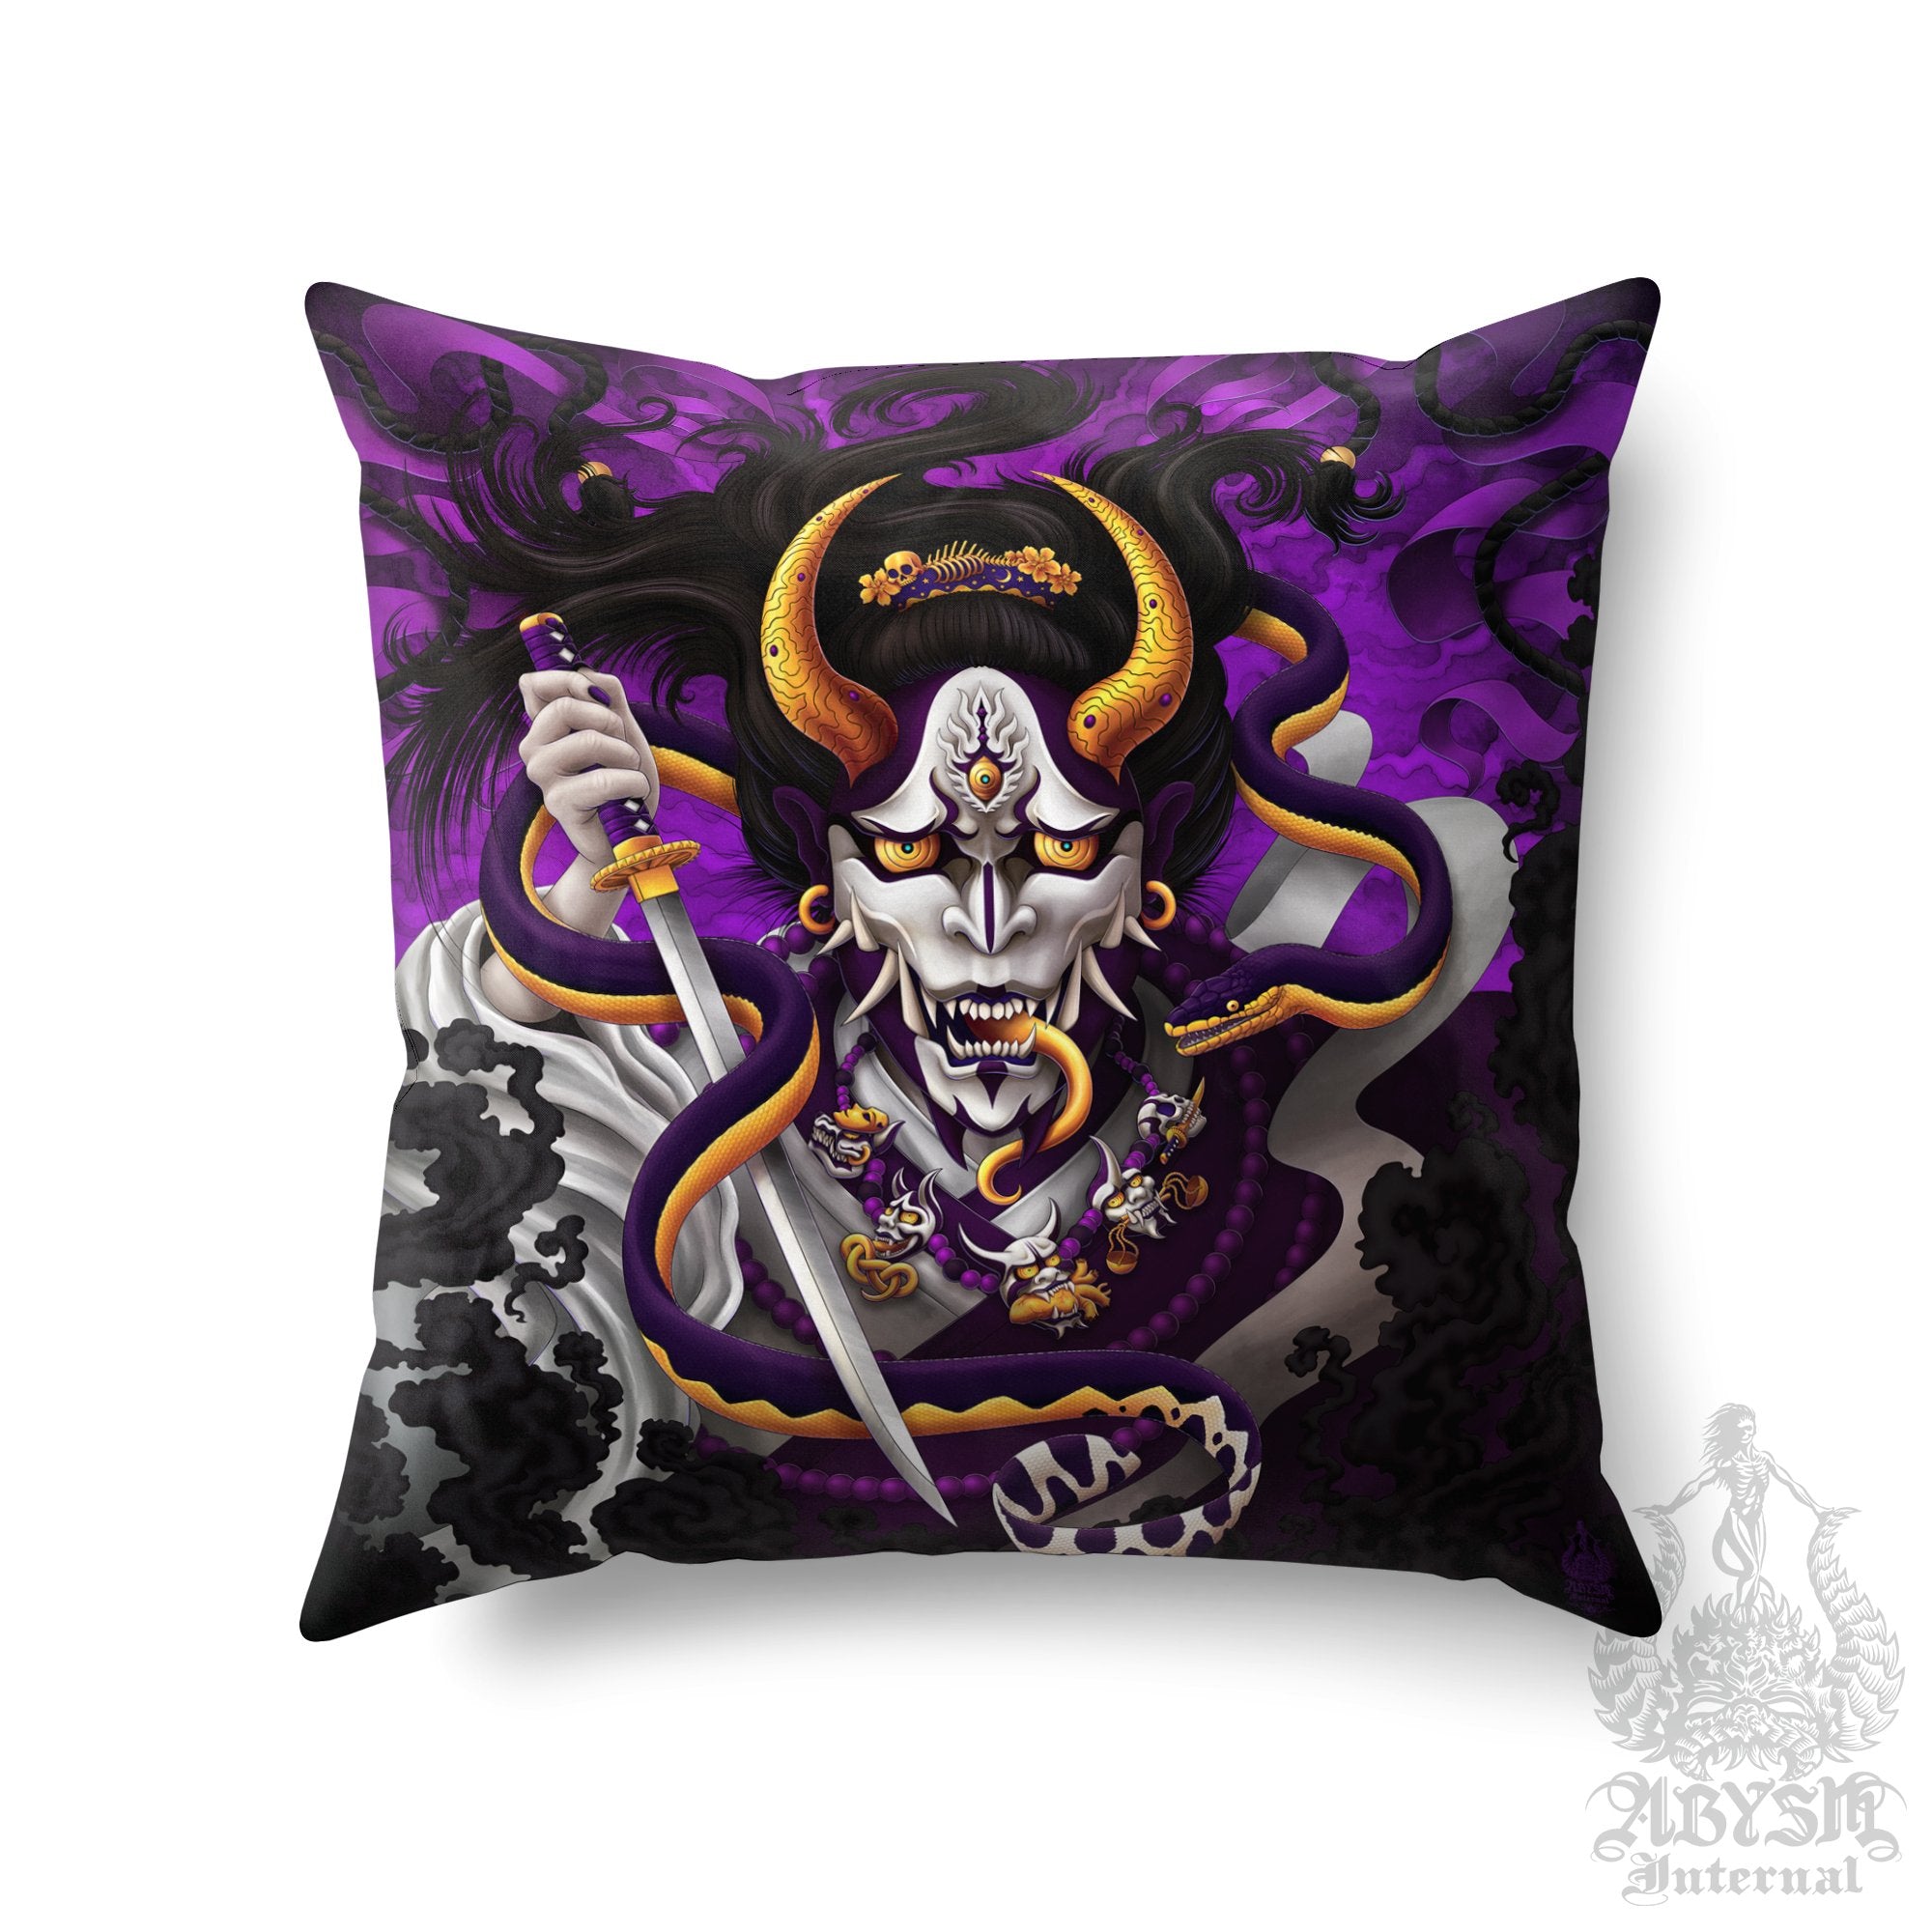 White Goth Throw Pillow, Decorative Accent Pillow, Square Cushion Cover, Purple Hannya, Japanese Demon & Snake, Anime Room Decor - Abysm Internal